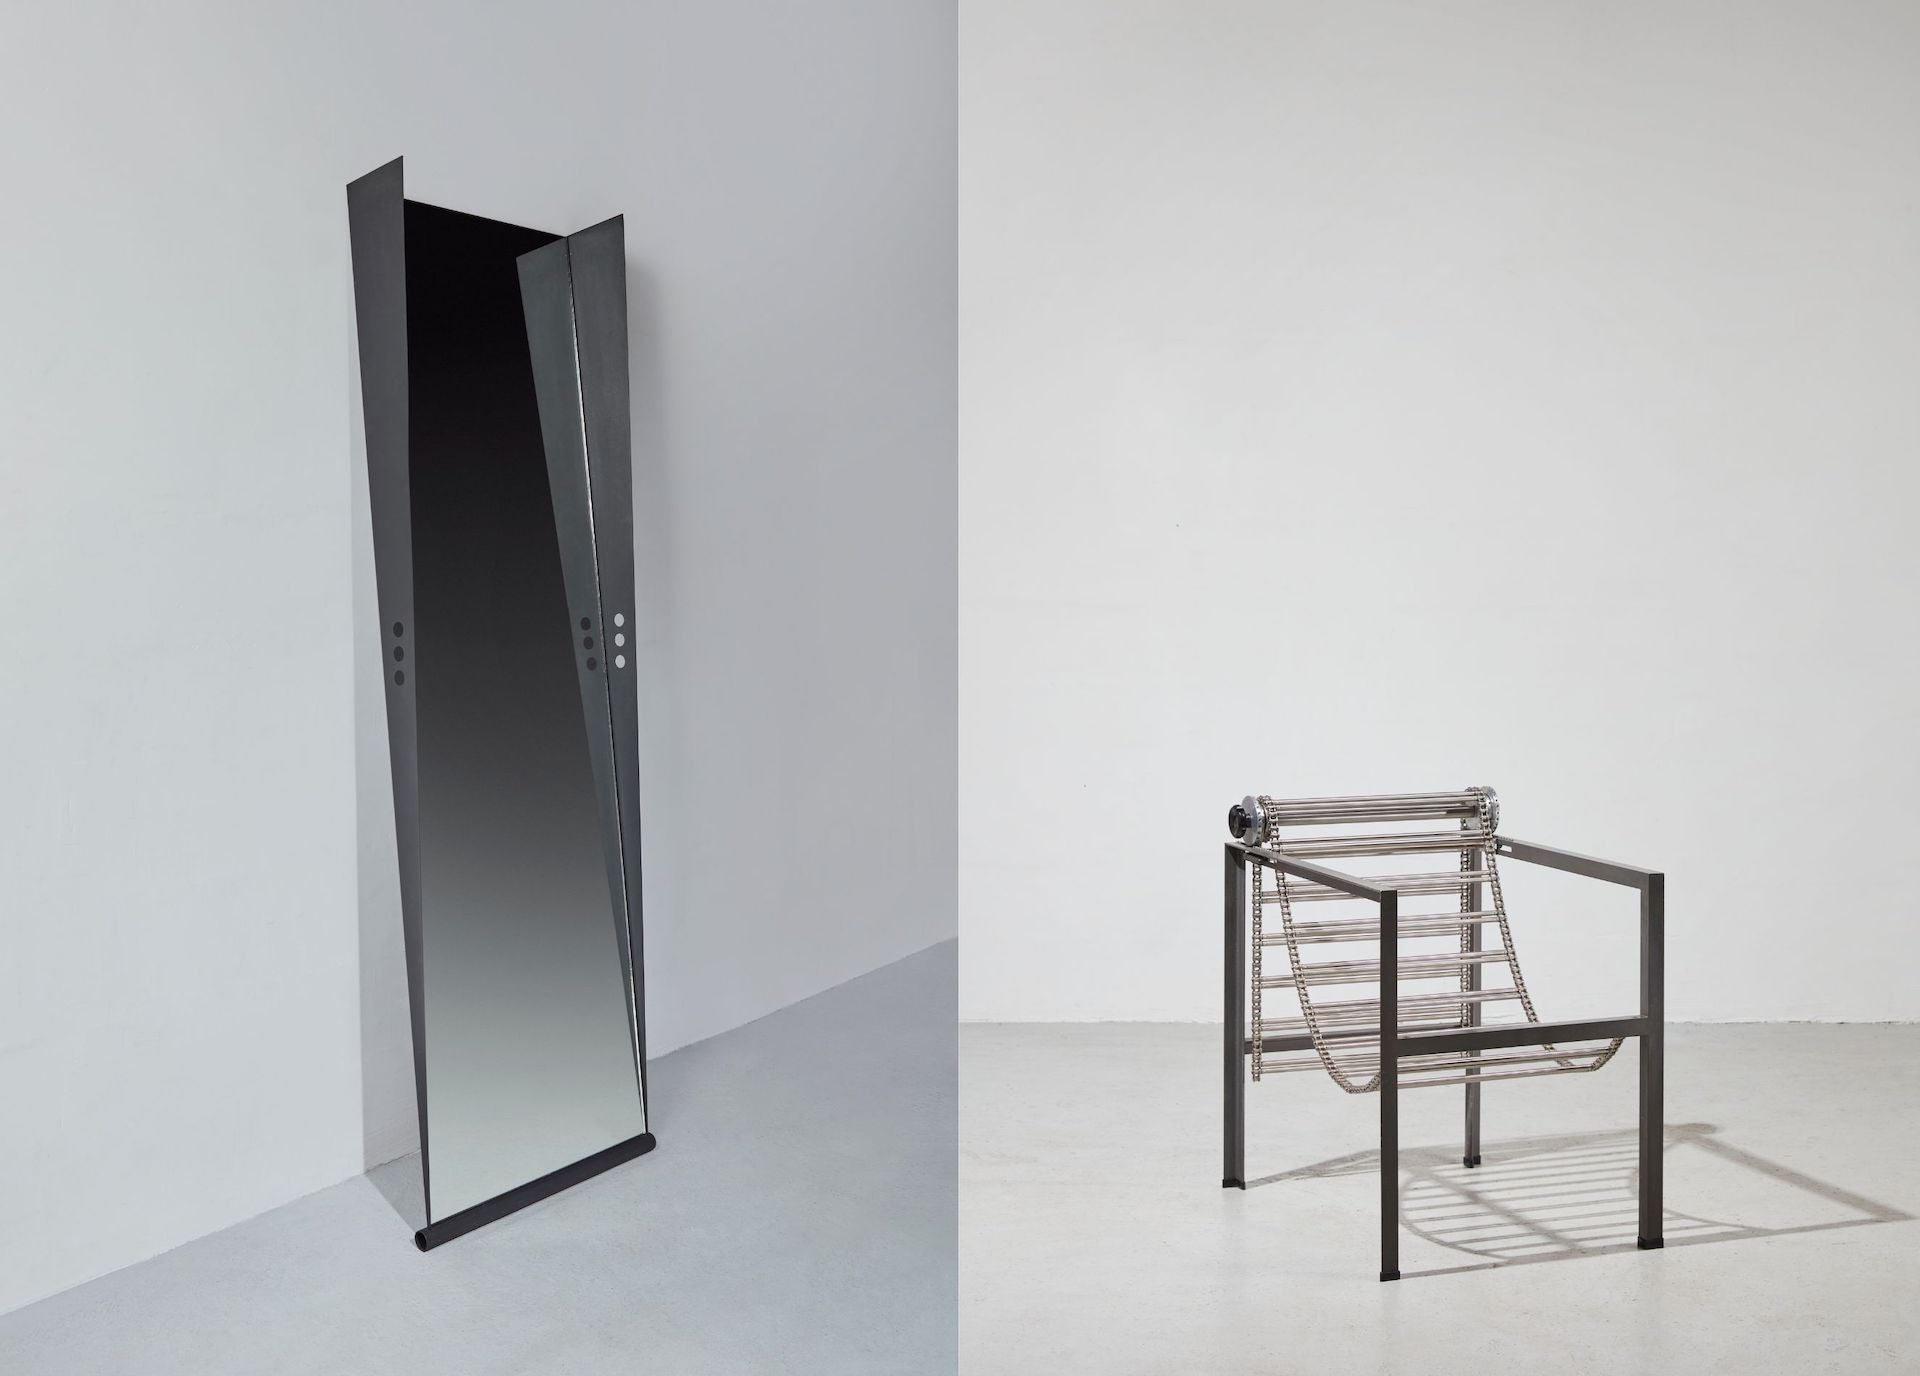 Tom Double standing mirror (Ca. 1985) by Philippe Starck. Barba d'Argento Armchair (1986) by Paolo Pallucco & Mireille Rivier. Photos courtesy of Ketabi Bourdet